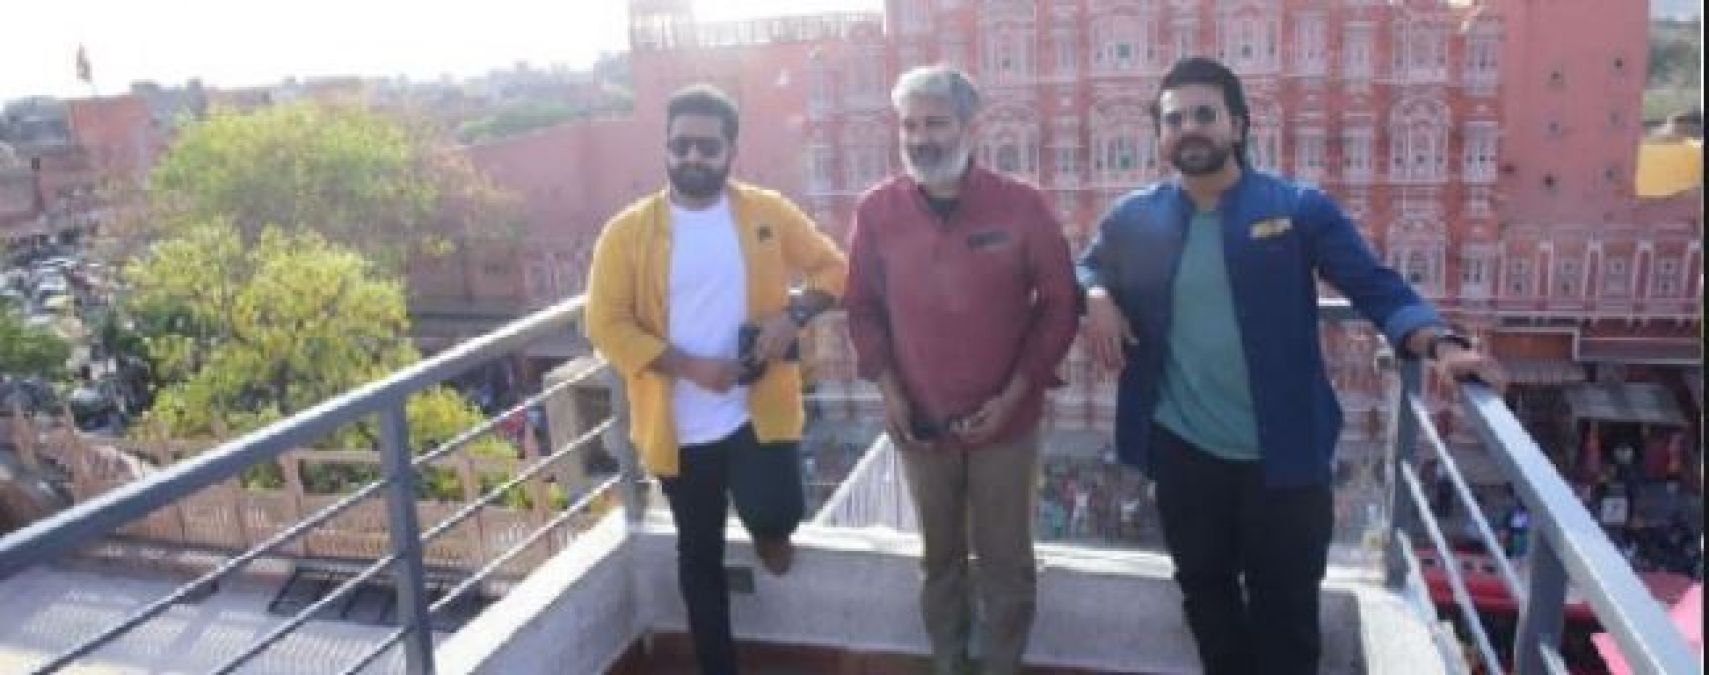 'RRR' team visited Jaipur's college in grand style